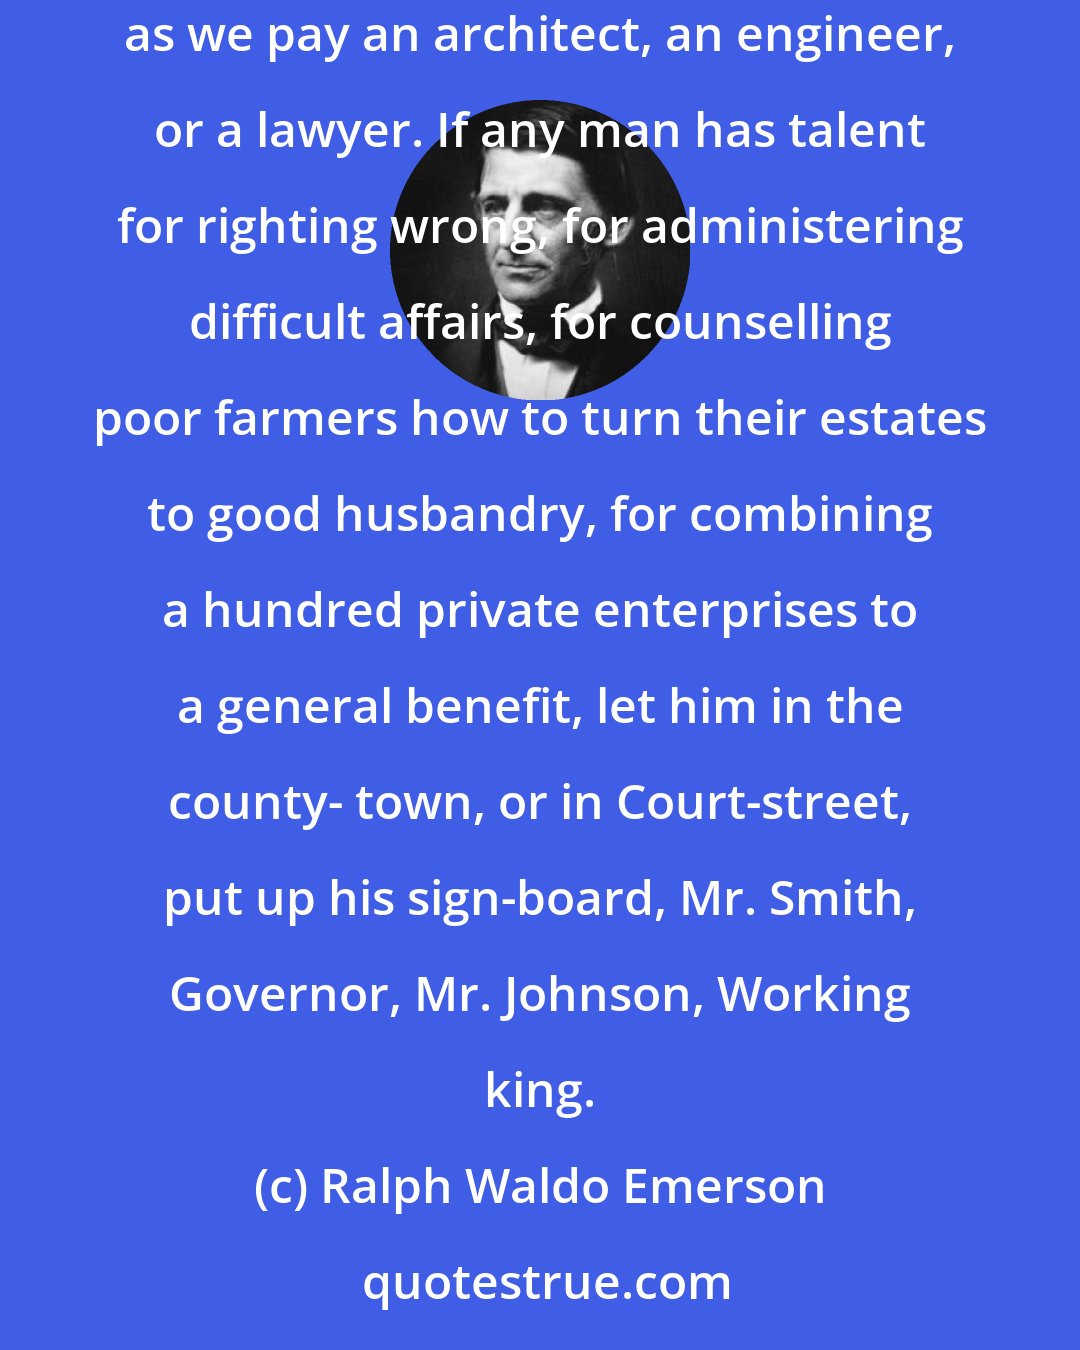 Ralph Waldo Emerson: We have feudal governments in a commercial age. It would be but an easy extension of our commercial system, to pay a private emperor a fee for services, as we pay an architect, an engineer, or a lawyer. If any man has talent for righting wrong, for administering difficult affairs, for counselling poor farmers how to turn their estates to good husbandry, for combining a hundred private enterprises to a general benefit, let him in the county- town, or in Court-street, put up his sign-board, Mr. Smith, Governor, Mr. Johnson, Working king.